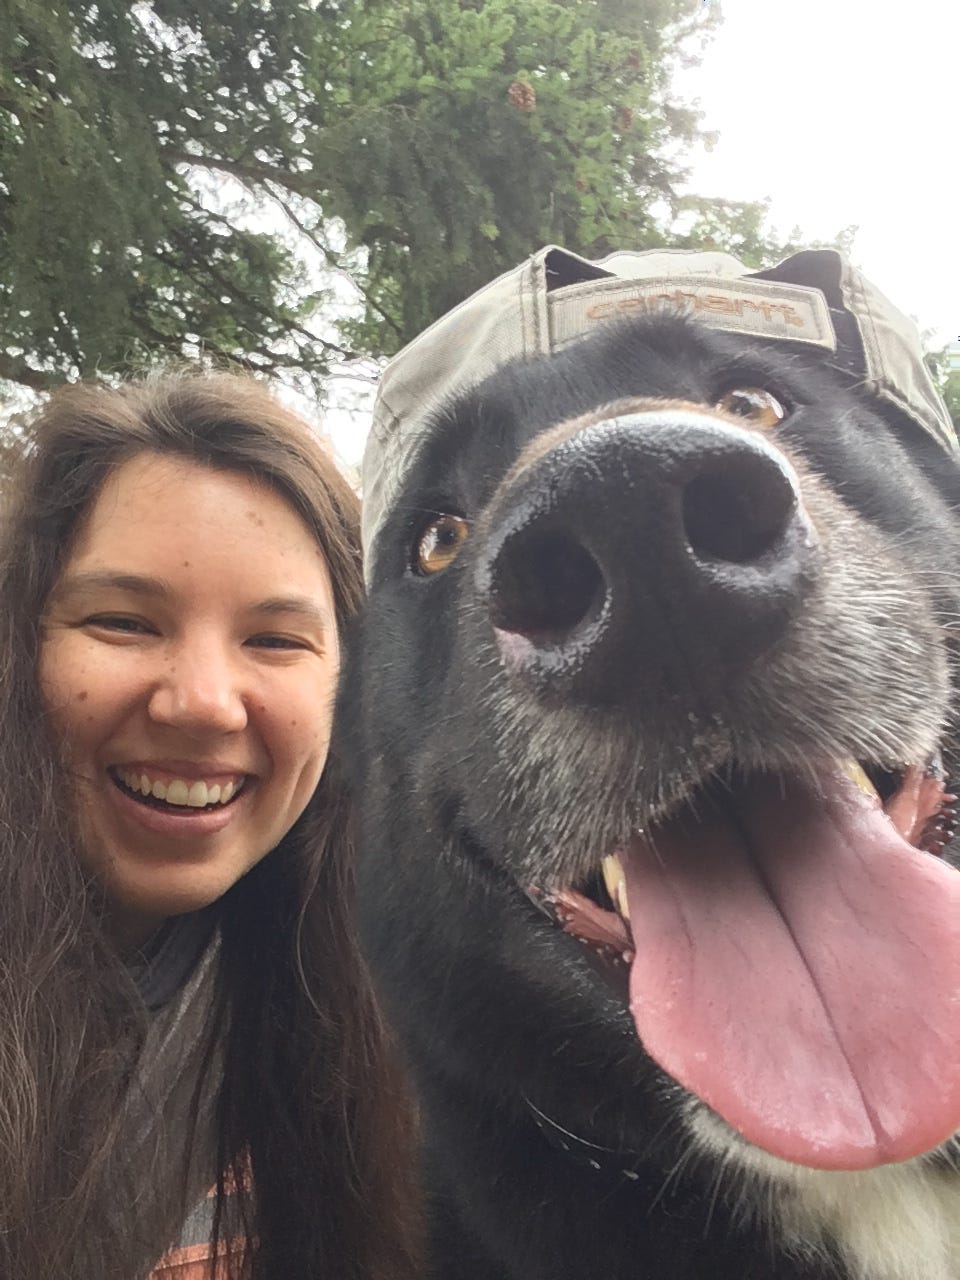 on left, Caucasian young woman smiling with face and eyes. On right in front, black and white big dog with tongue out and nose healing. Backward baseball cap on dog. Tree tops above/behind beings. They are outside.